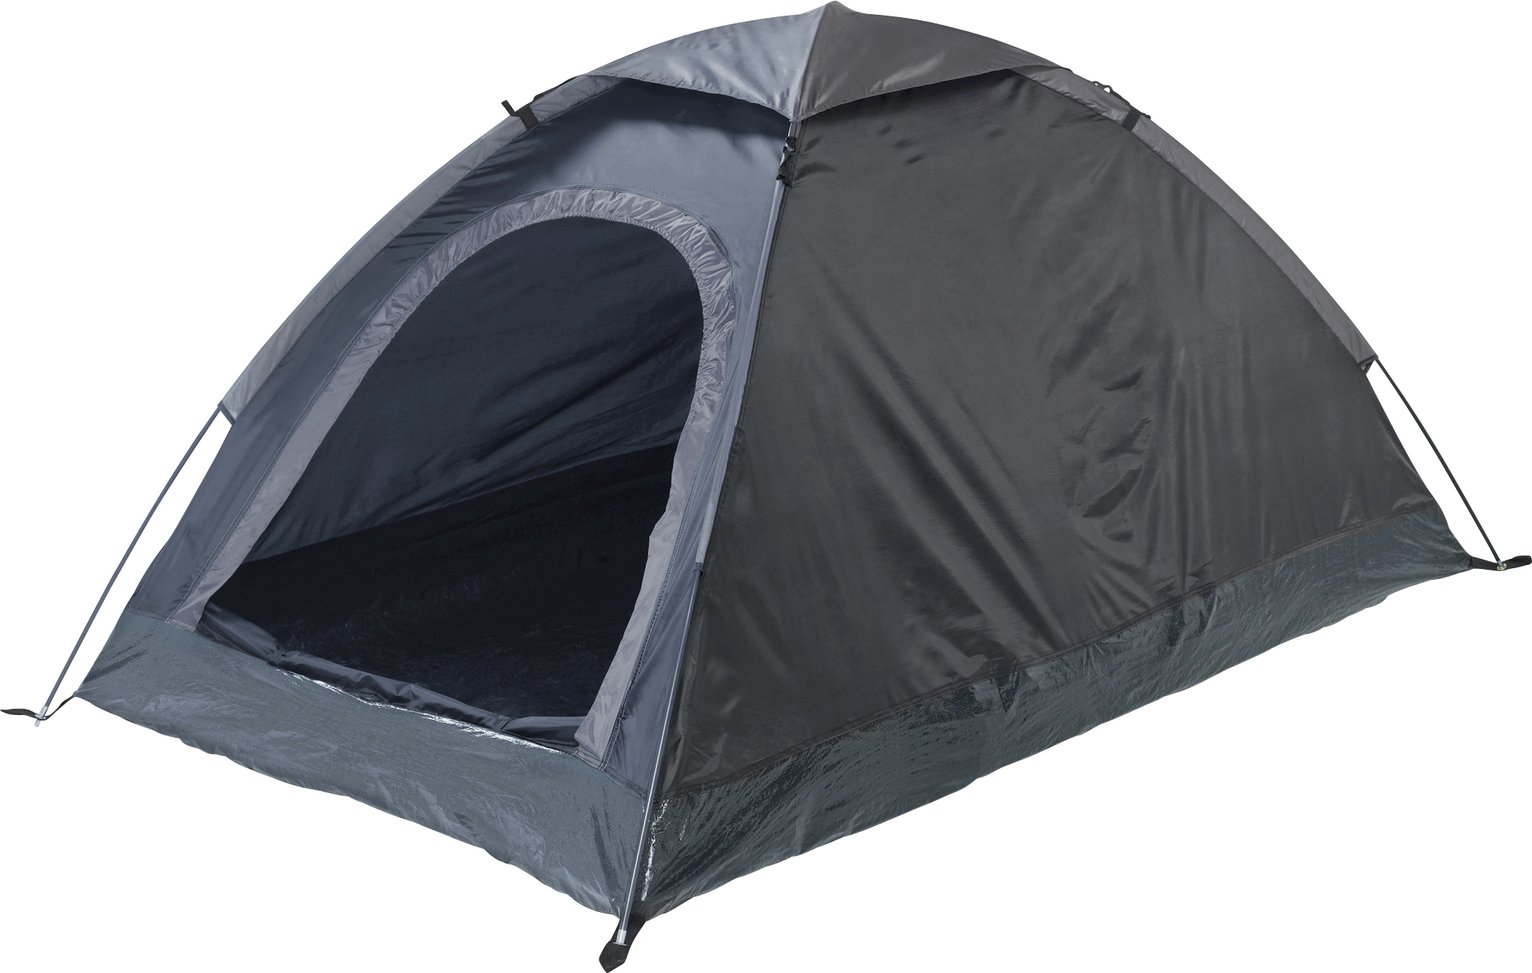 2 Person 1 Room Dome Camping Tent